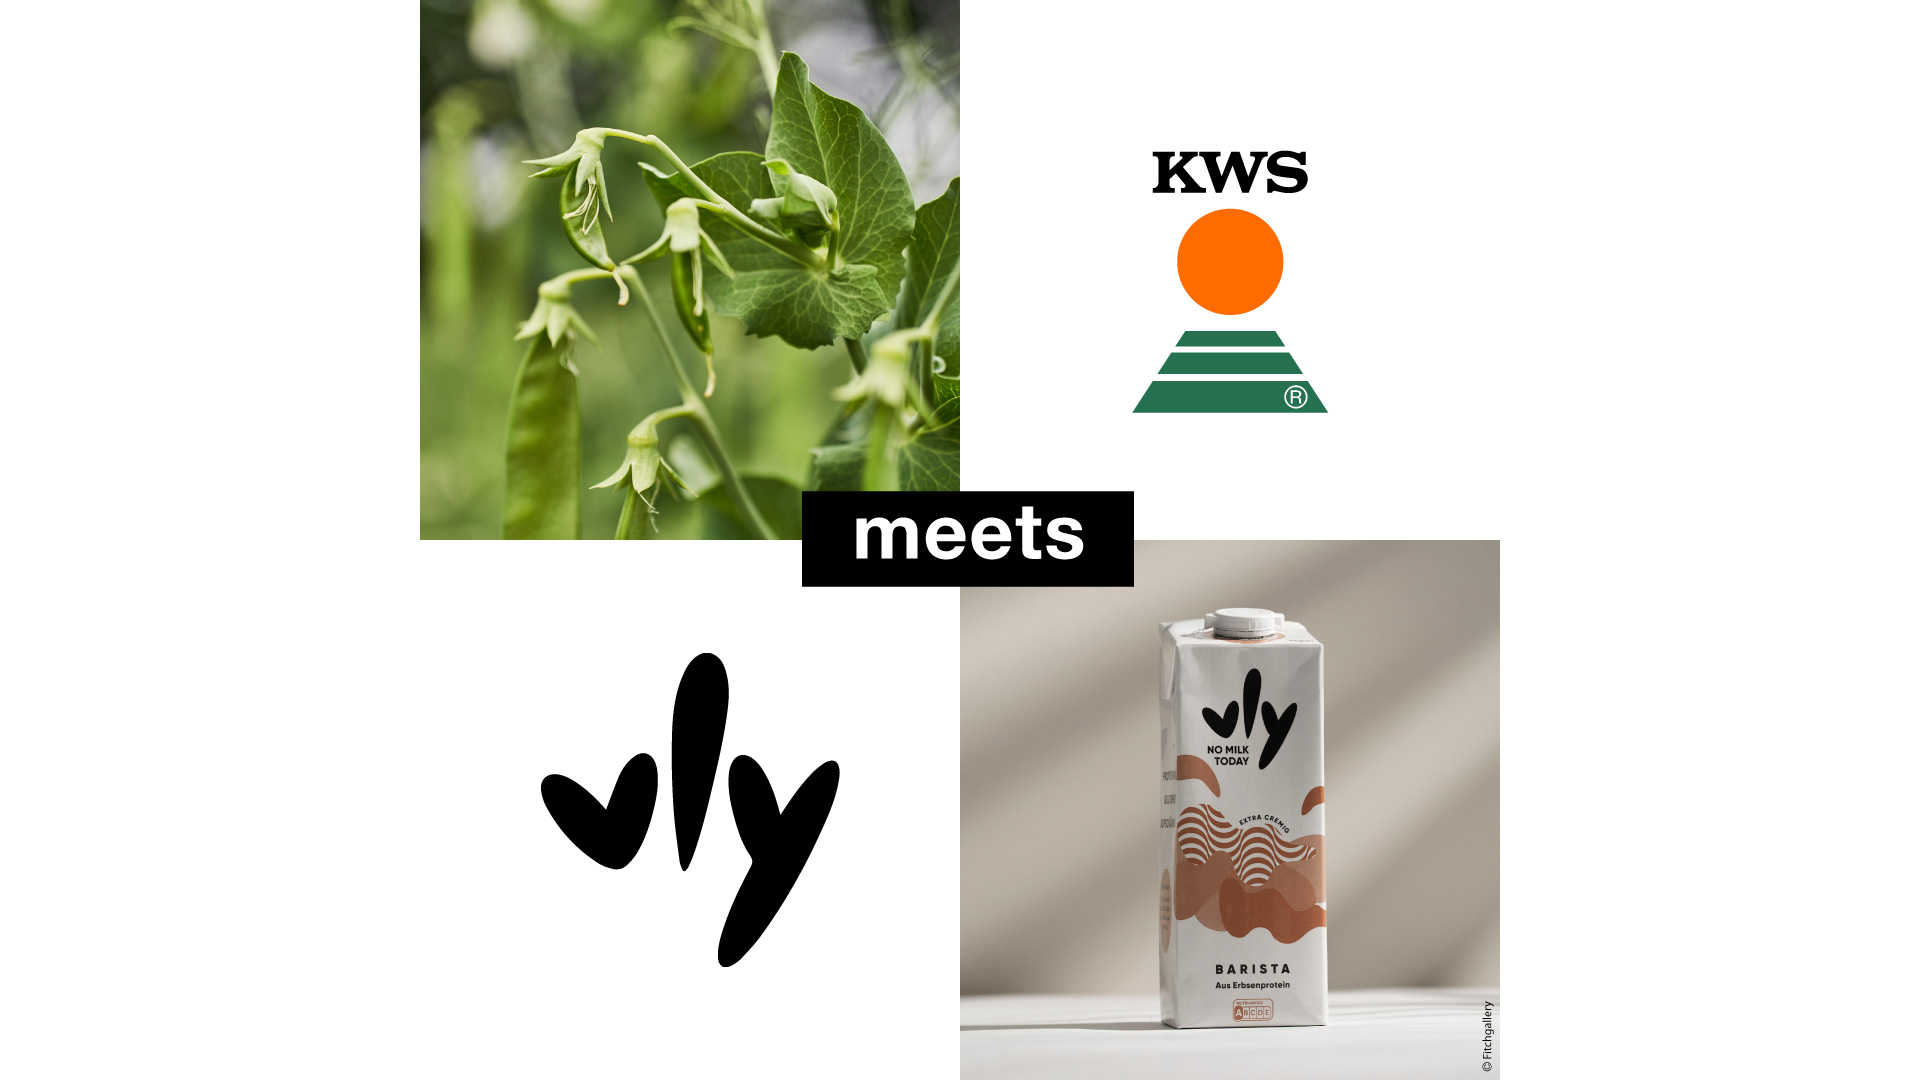 KWS partners with vly to further develop plant-based foods